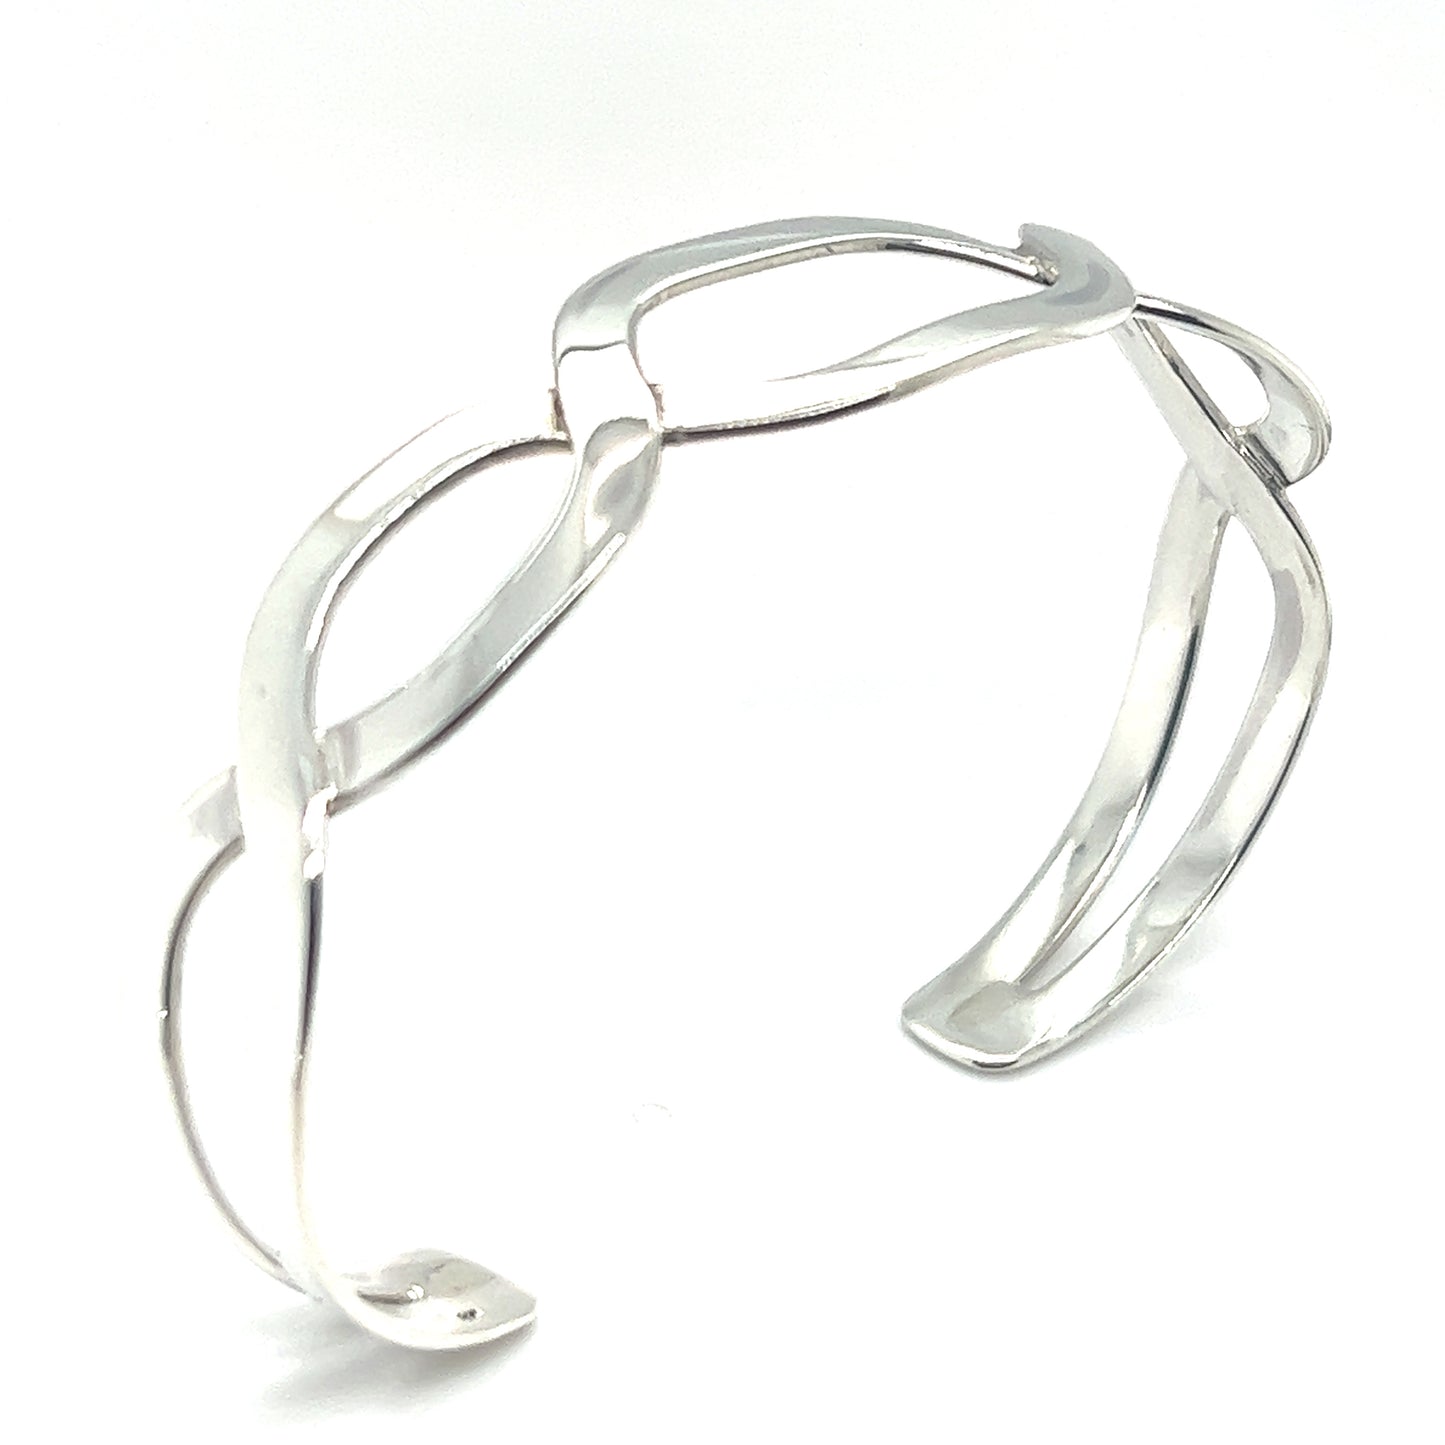 A sleek and streamlined Super Silver Elongated Oval Twisted Cuff bracelet with an elongated twisting design.